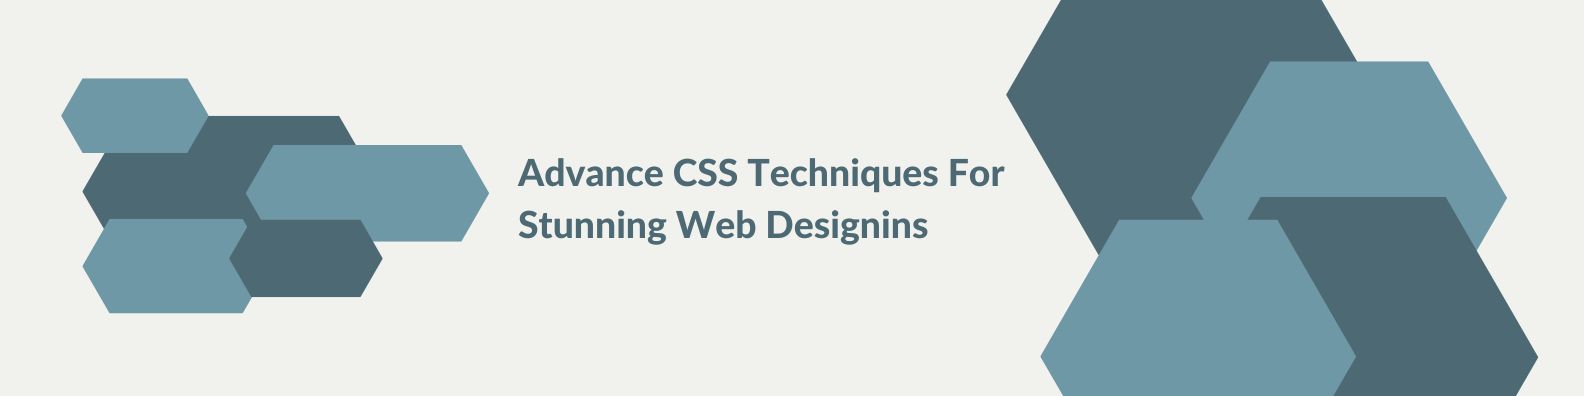 Advanced CSS Techniques for Stunning Web Designs